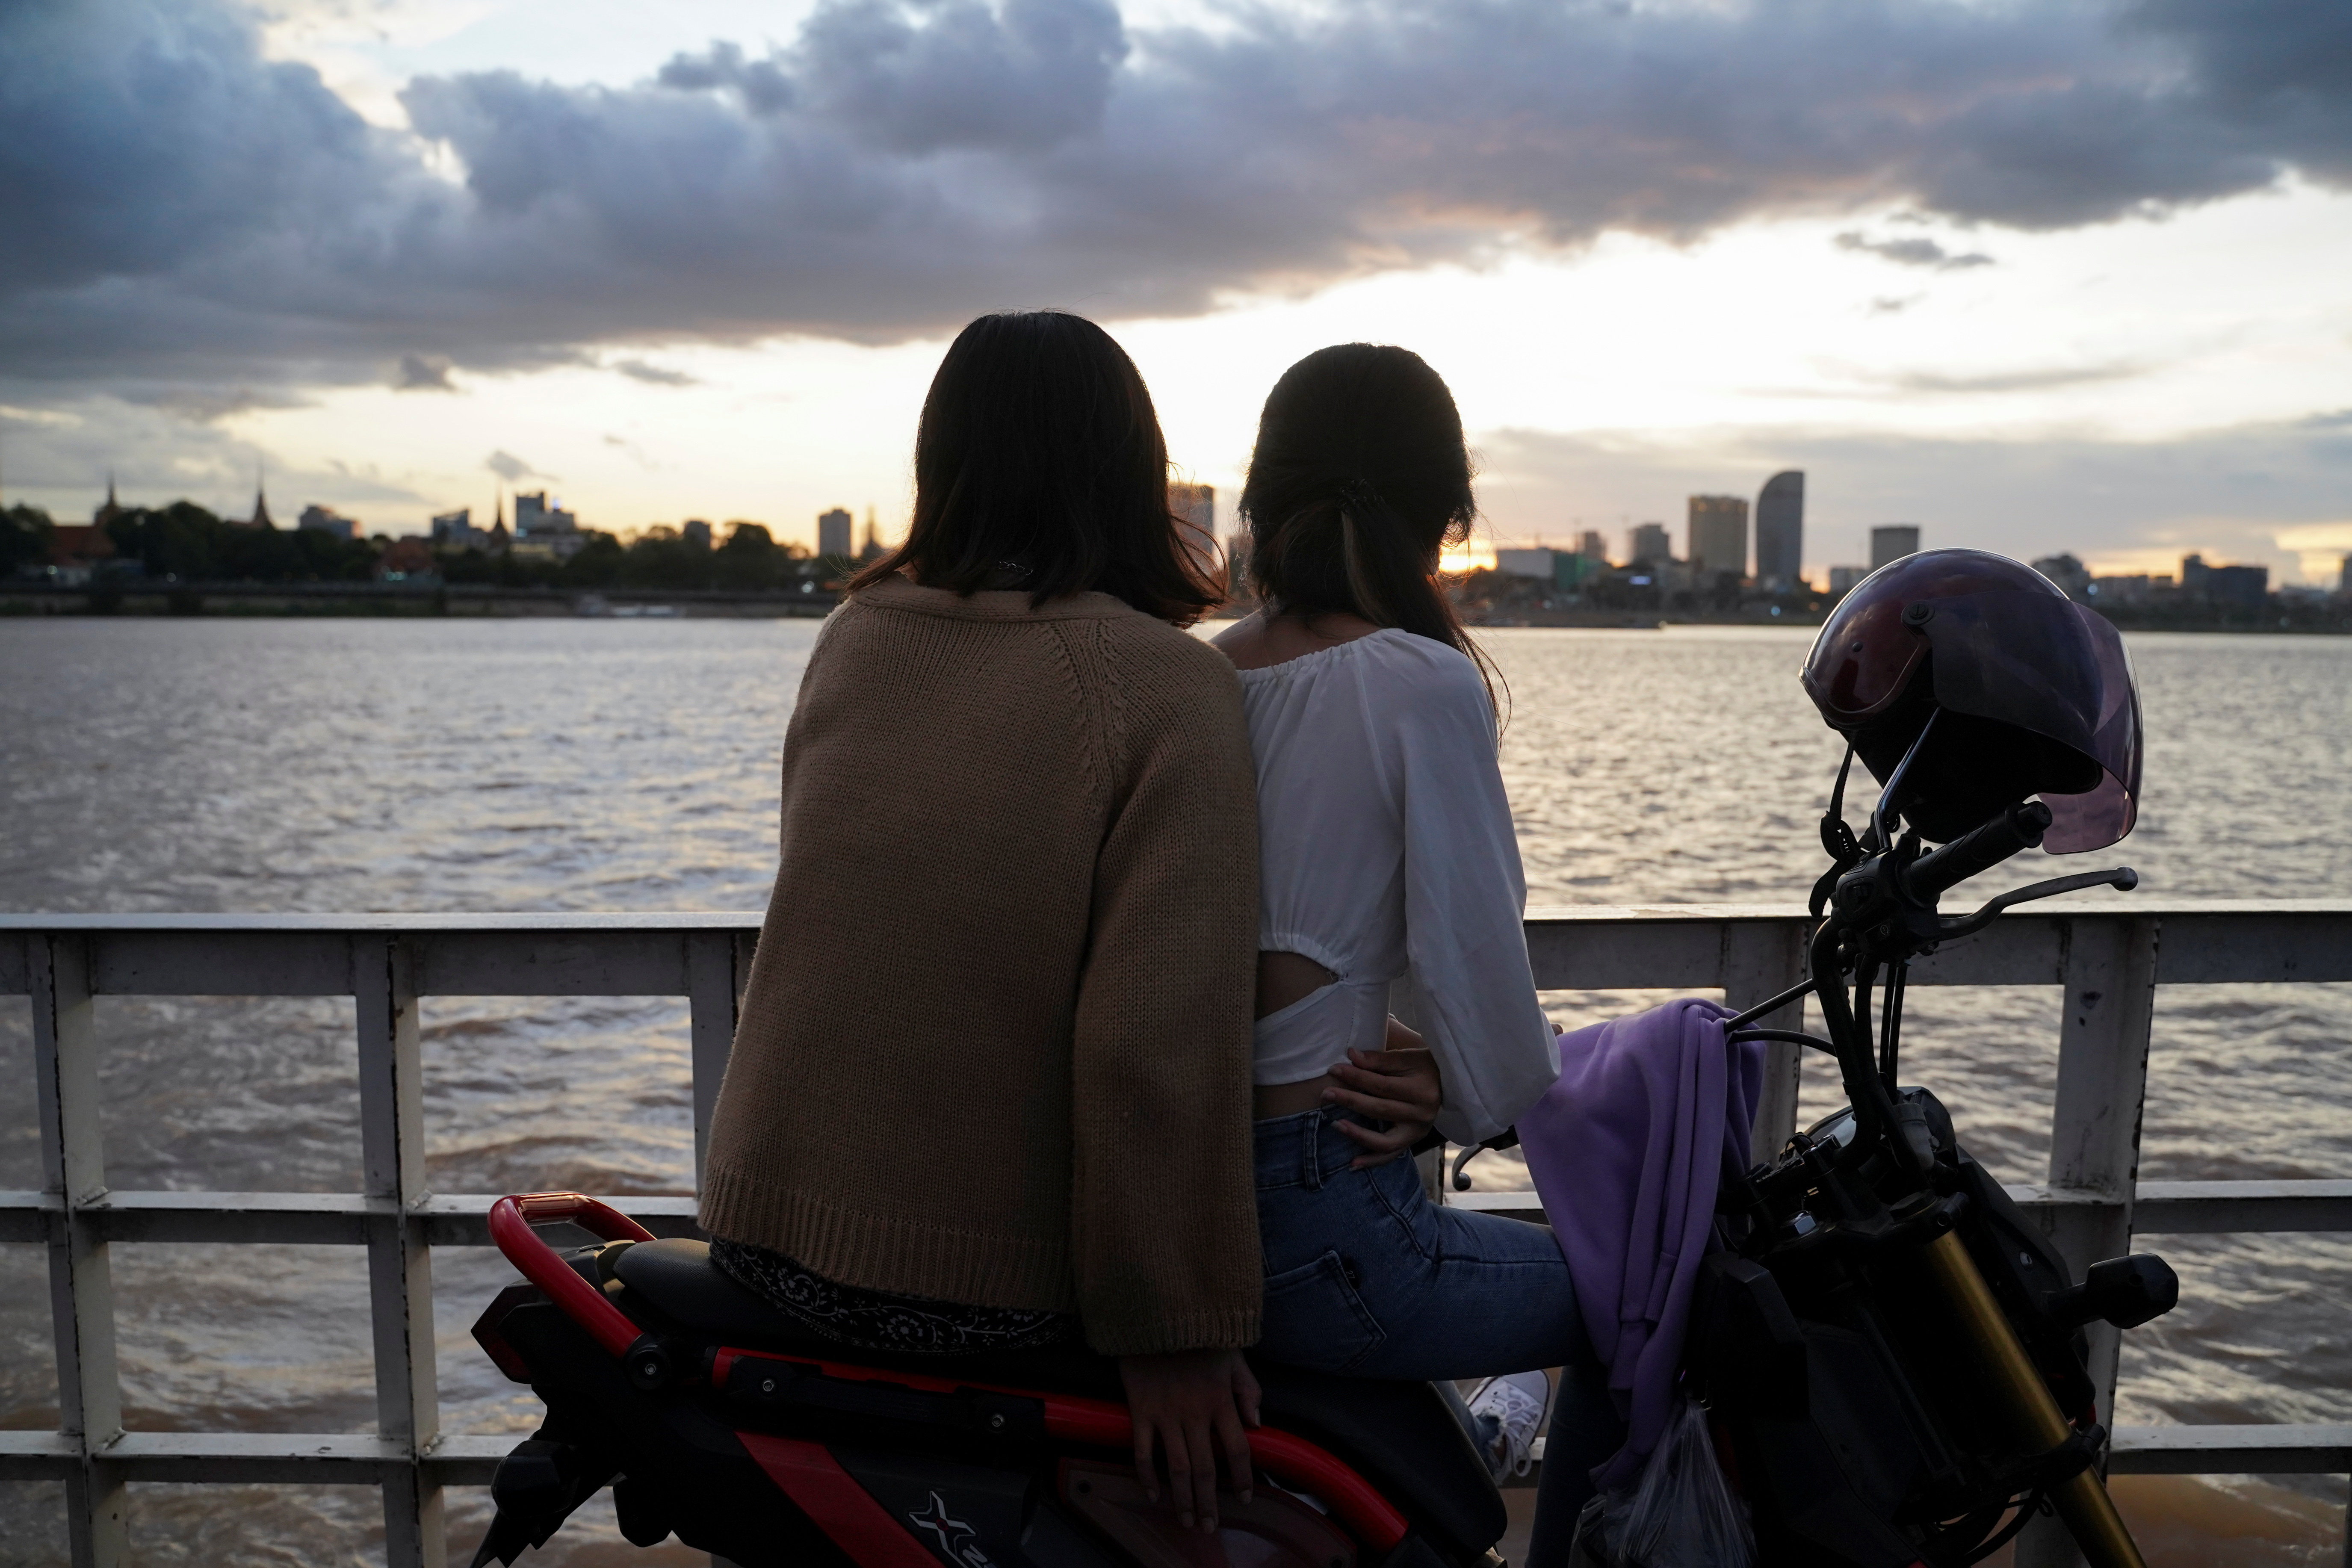 People ride a ferry at sunset on the Mekong River in Phnom Penh